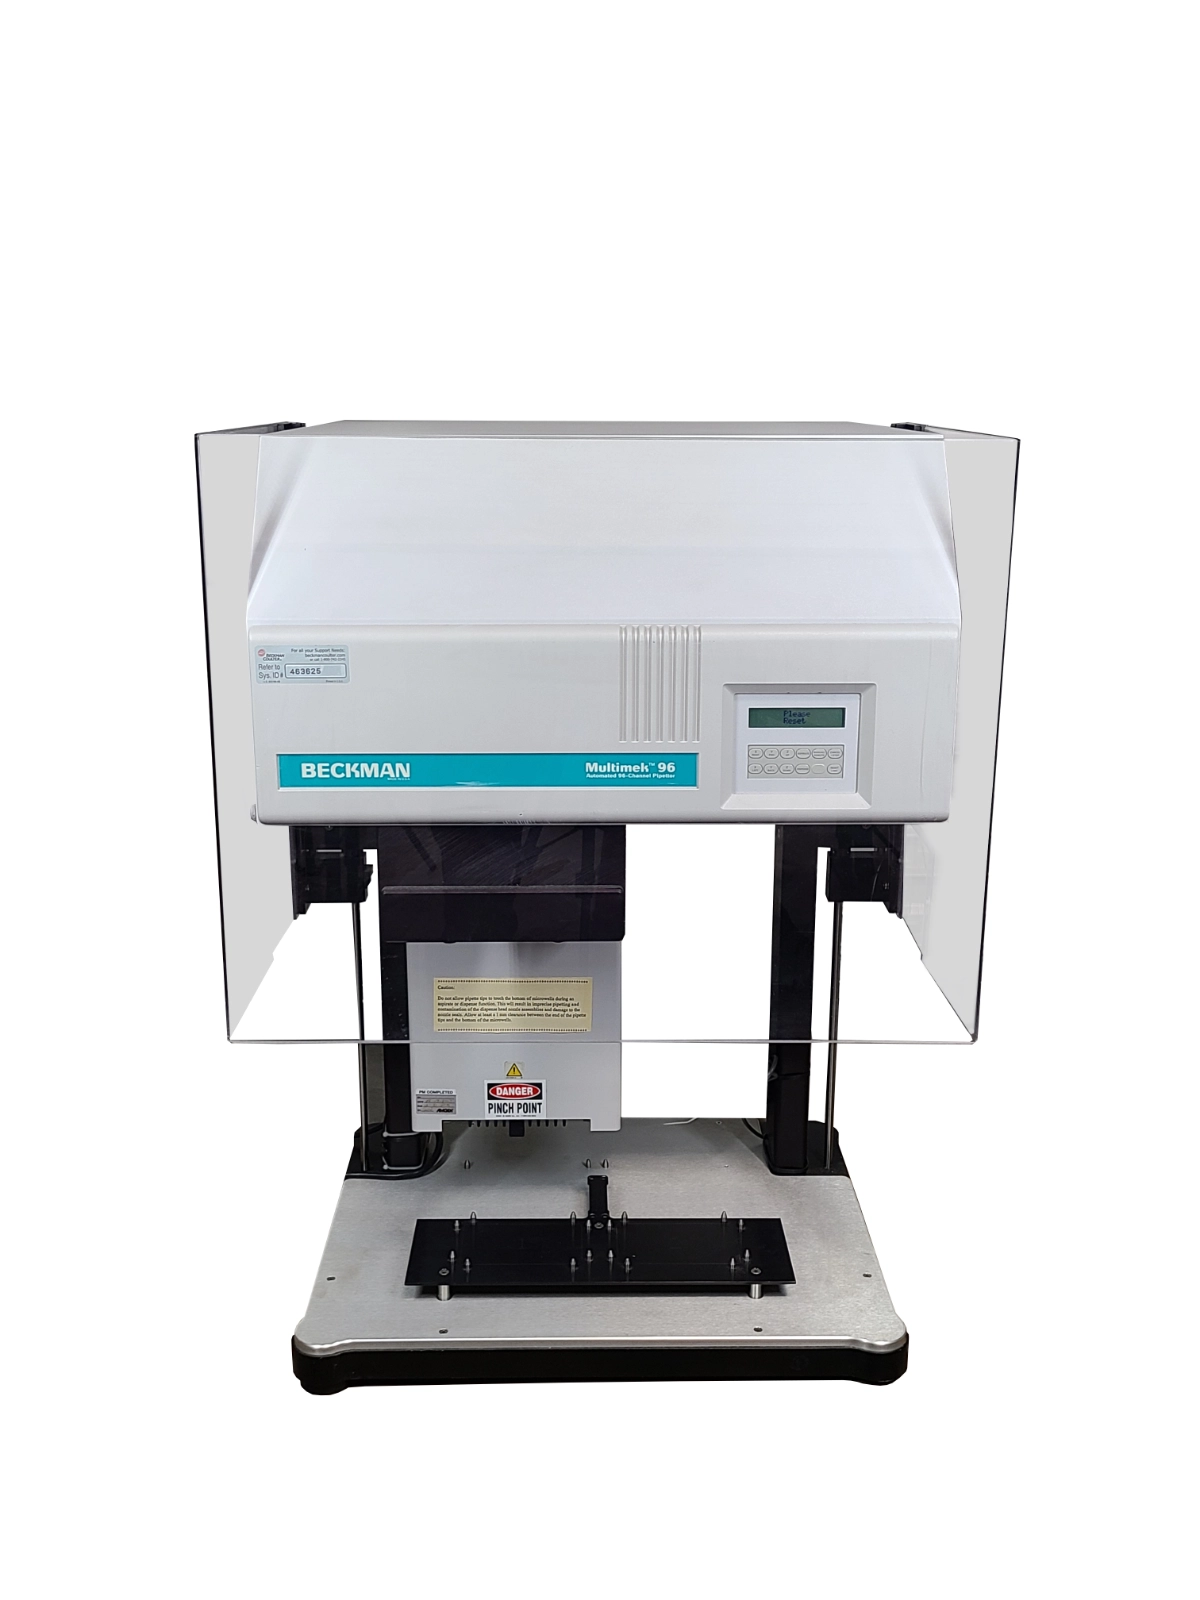 Beckman Coulter Multimek 96 Automated 96-Channel P